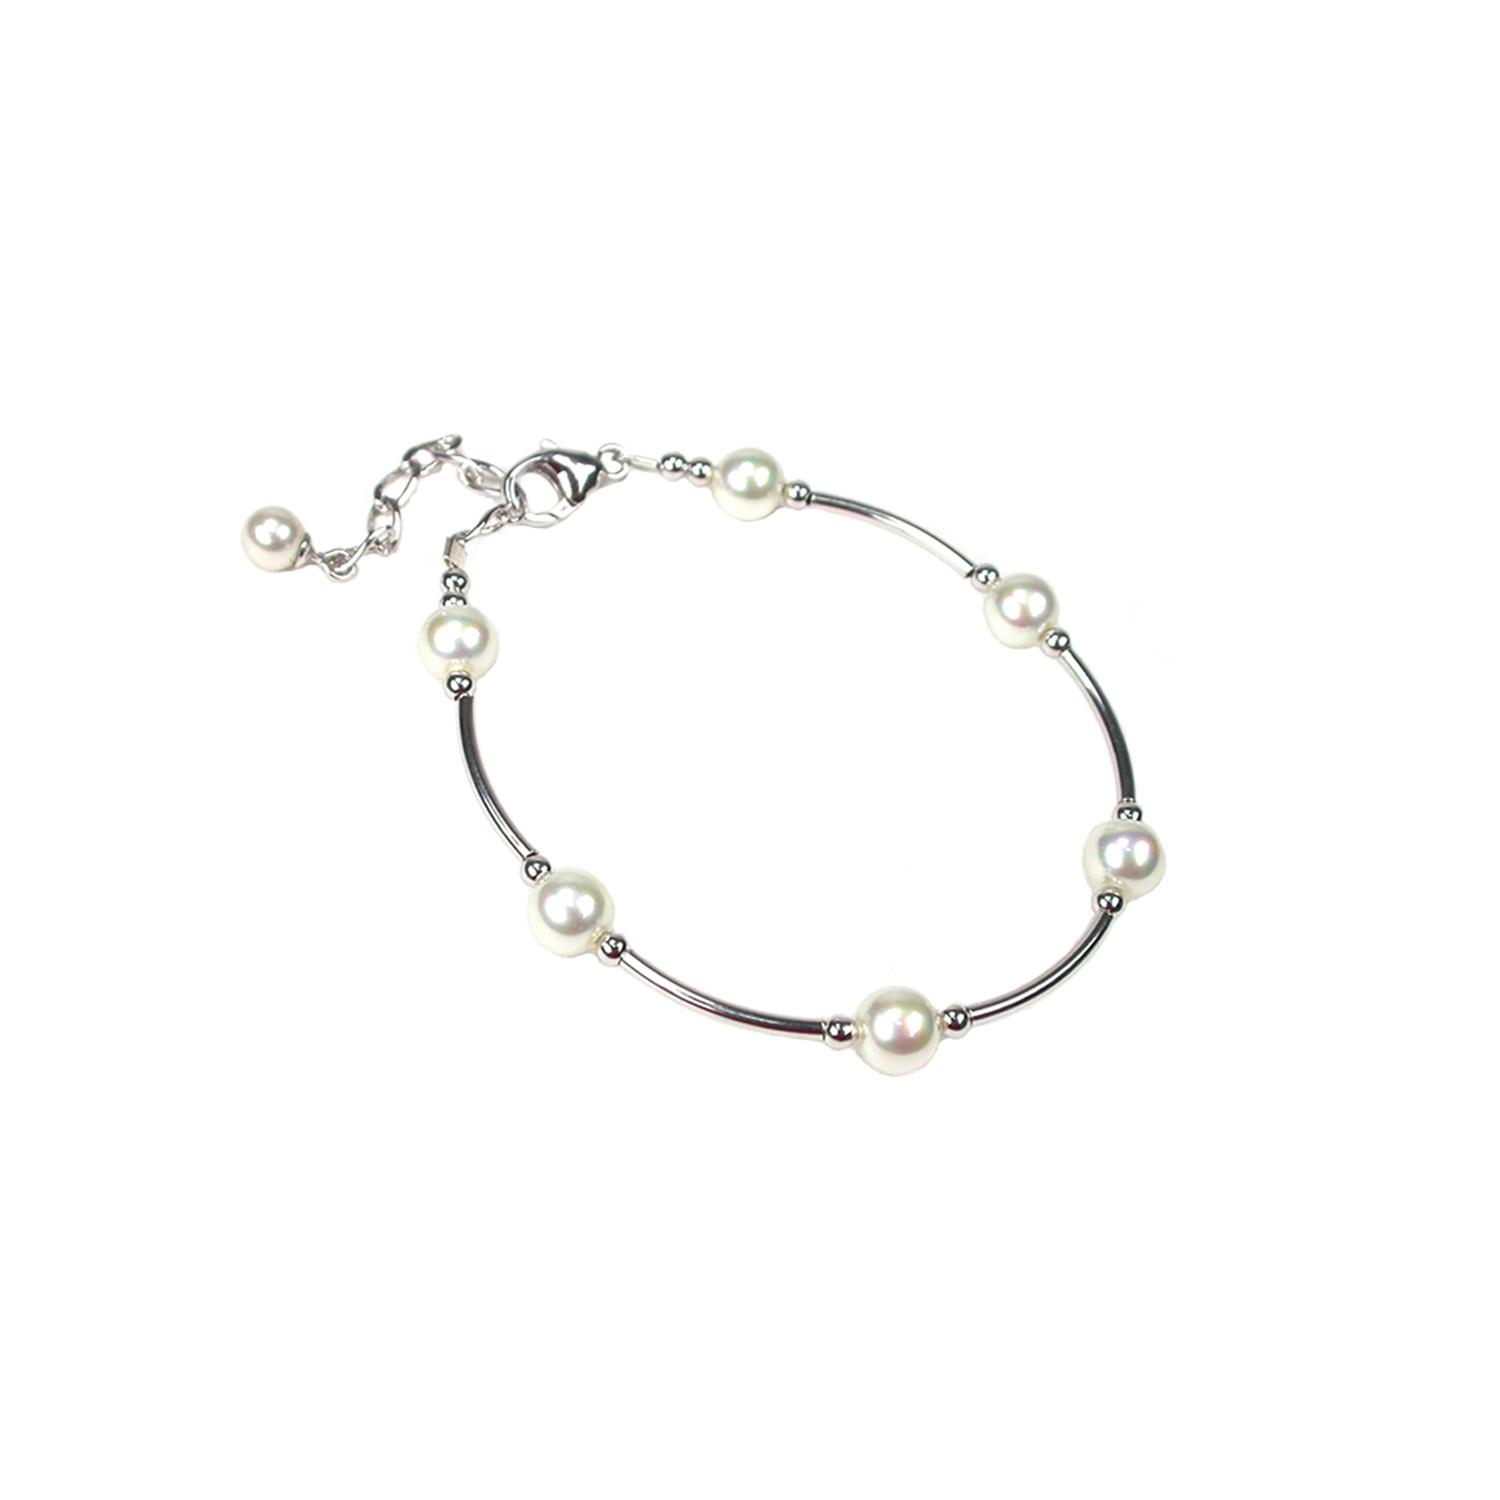 Silver Bracelet with Pearls 1